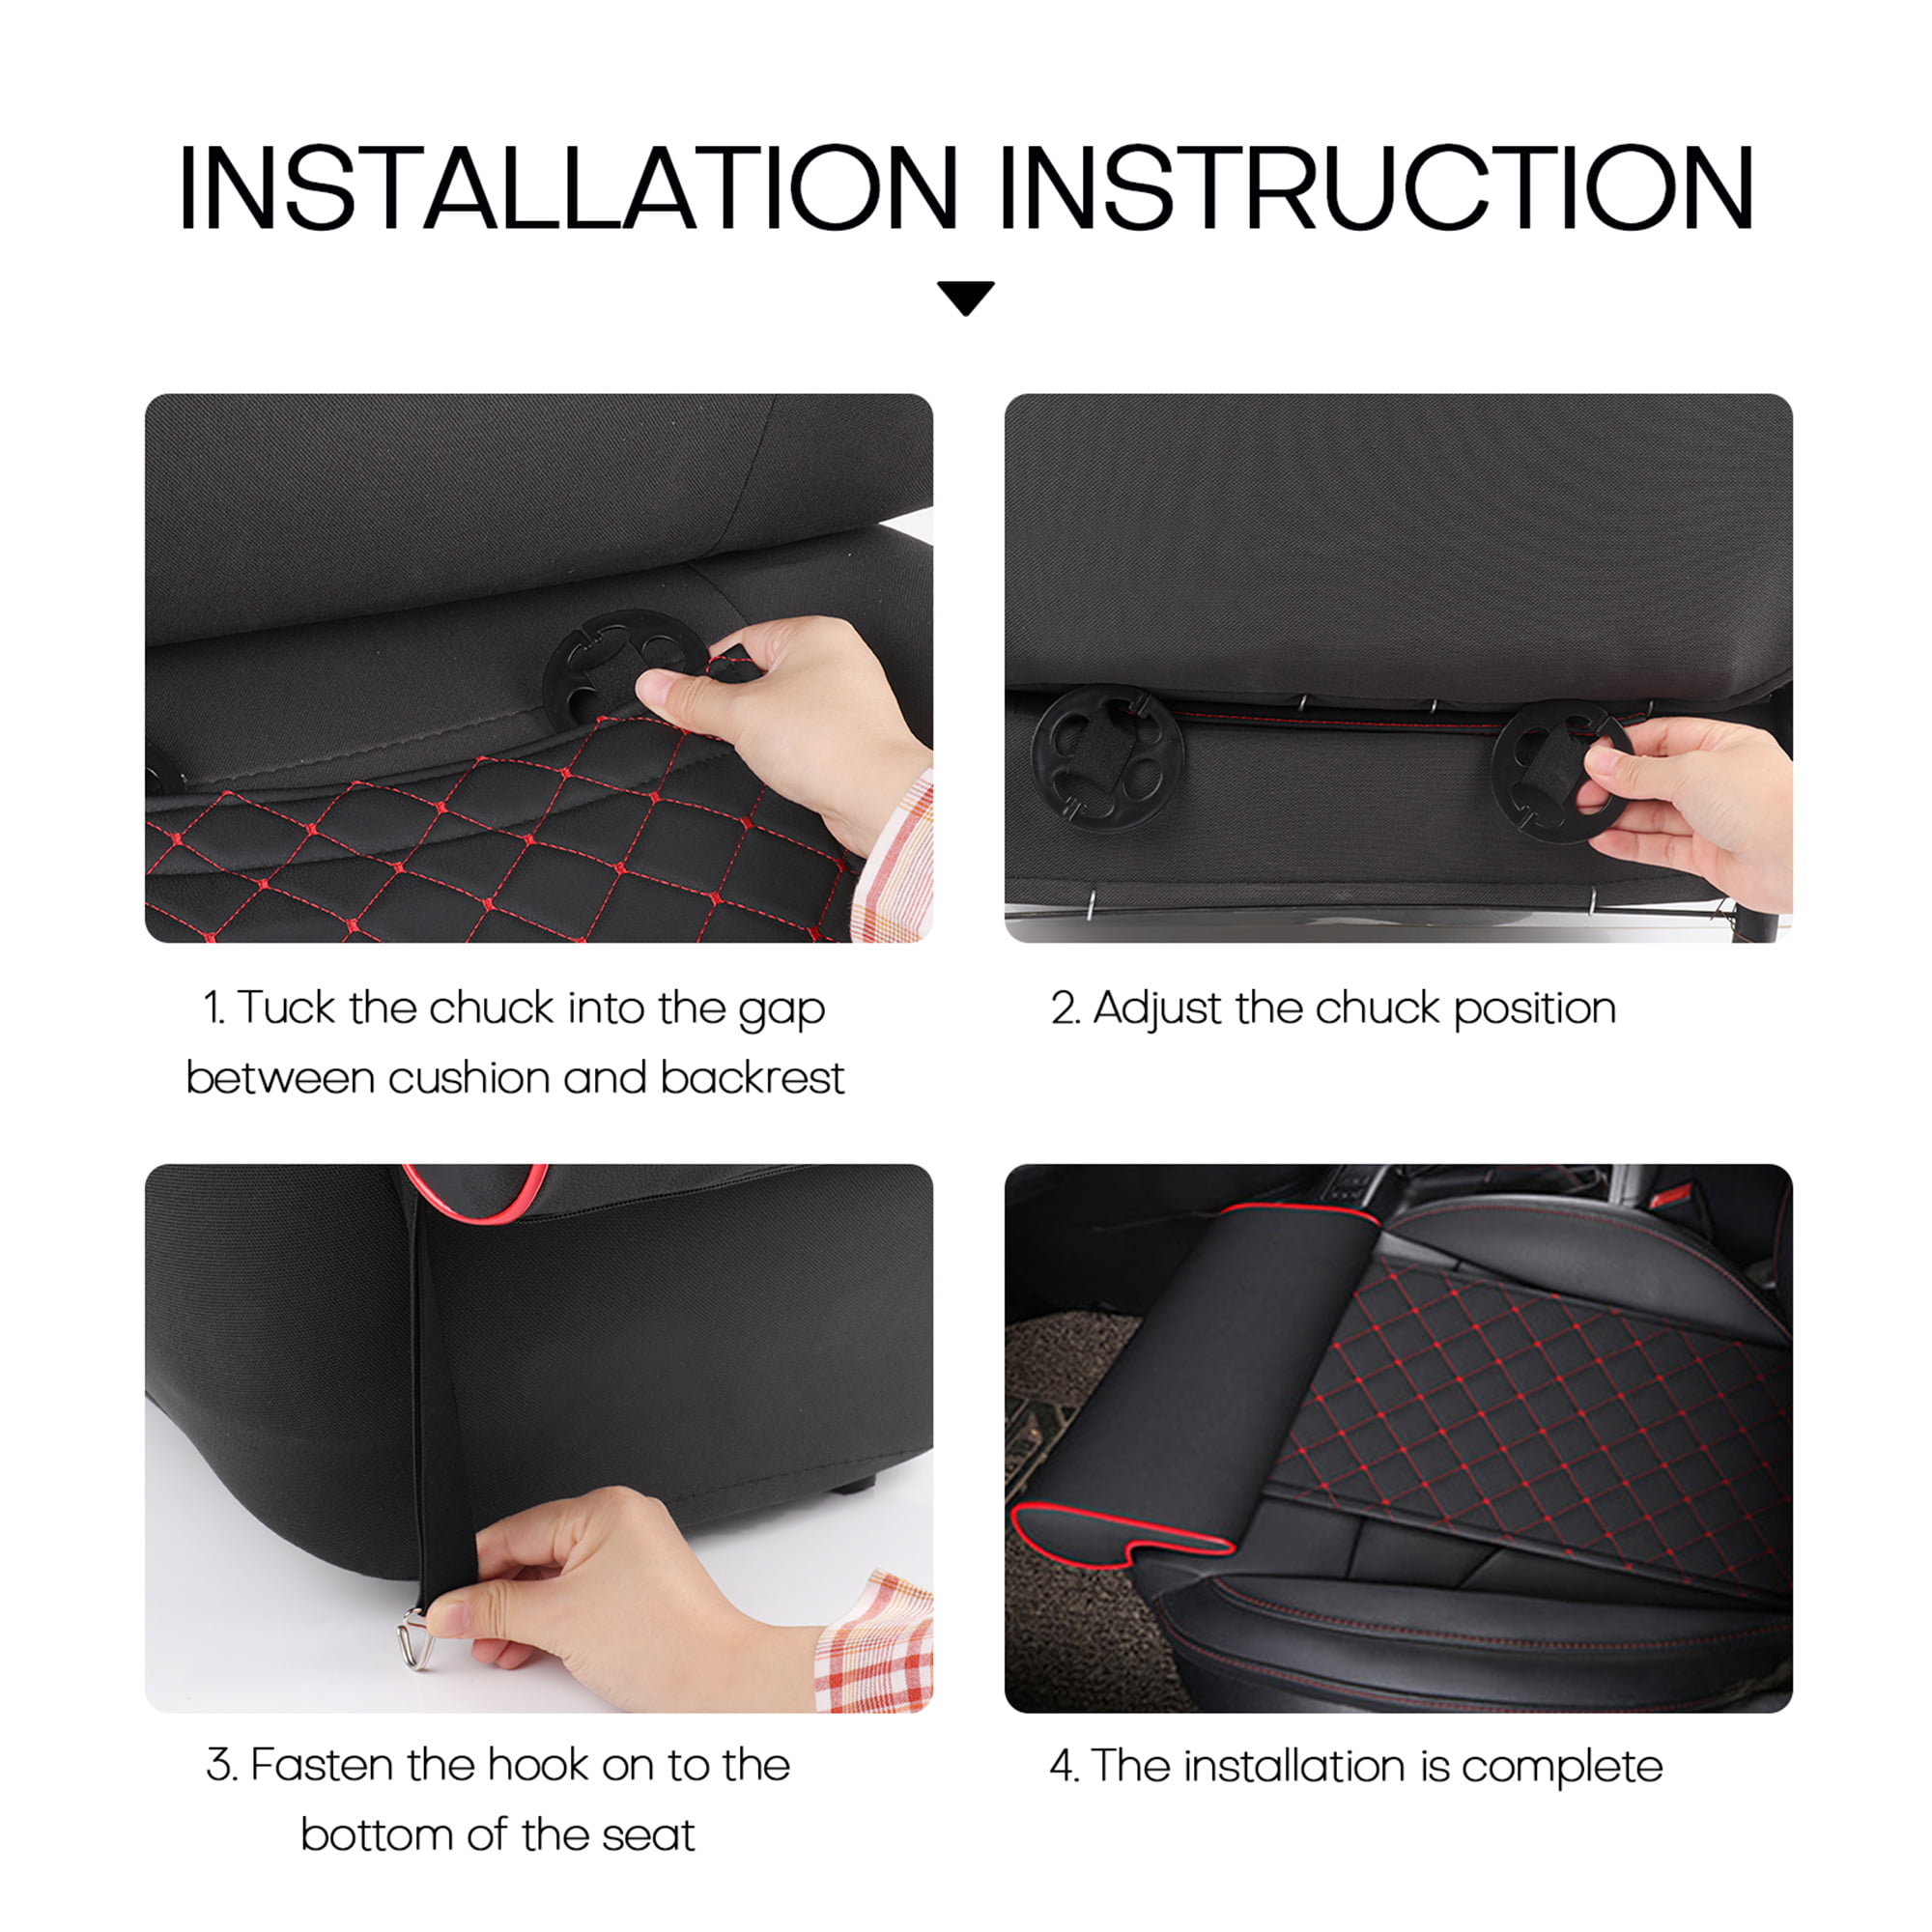 Car Seat Modification Leg Support,Car Seat Extender,Thigh Support Extension  Leg Cushion Used in Cars Buses Trains Offices Homes Leg Rest